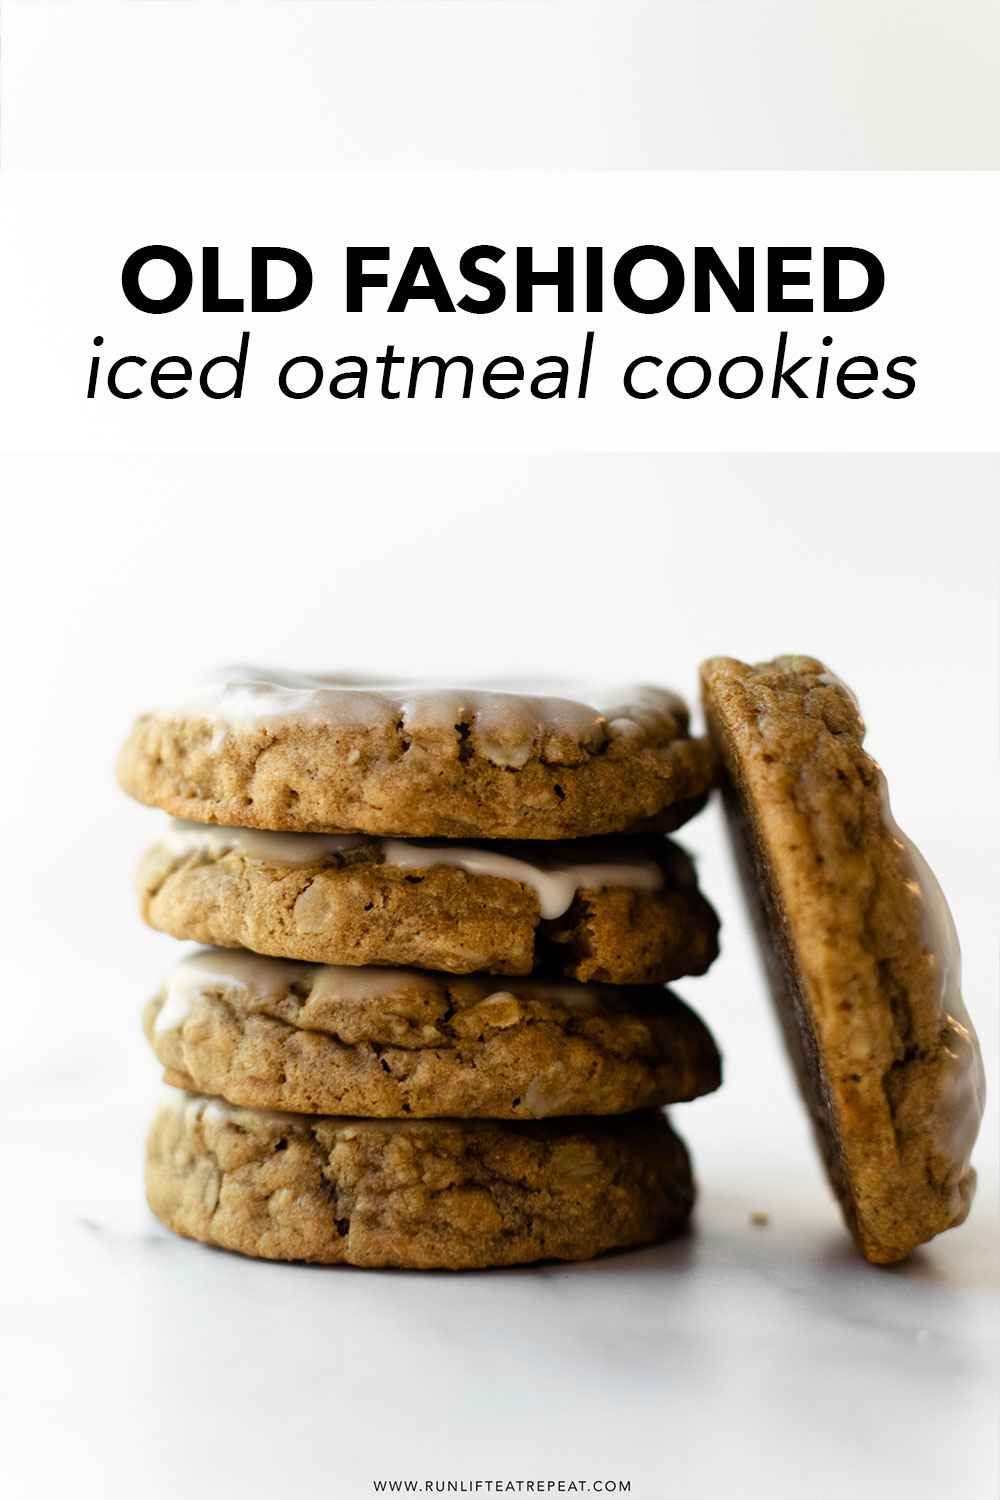 These classic iced oatmeal cookies are the old-fashioned style that you know and love from your childhood. With soft centers, crisp chewy edges, and topped with vanilla icing, these will be favorite for friends and family!